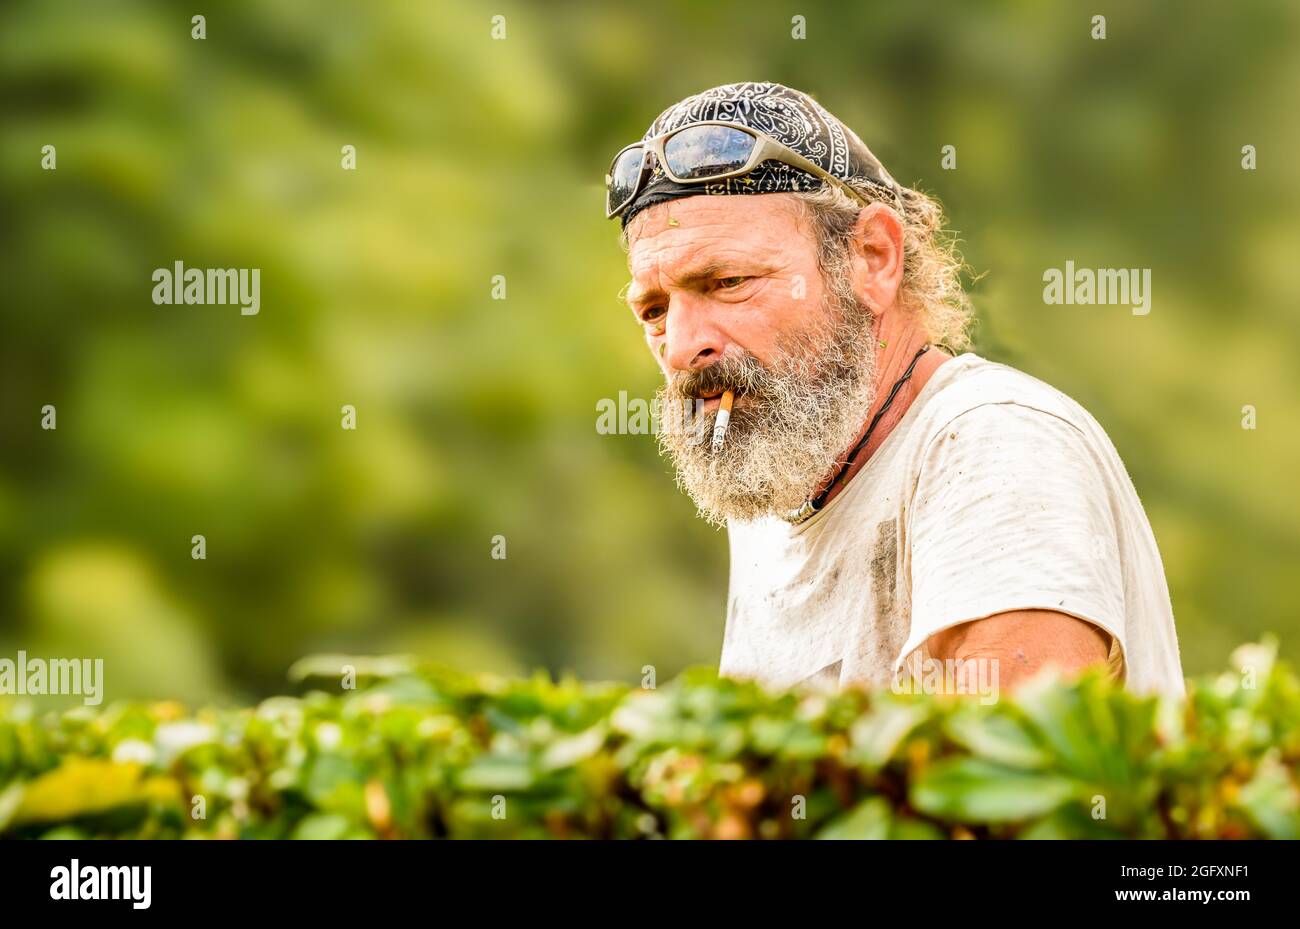 Portrait of mature man with beard at work in the garden. Stock Photo